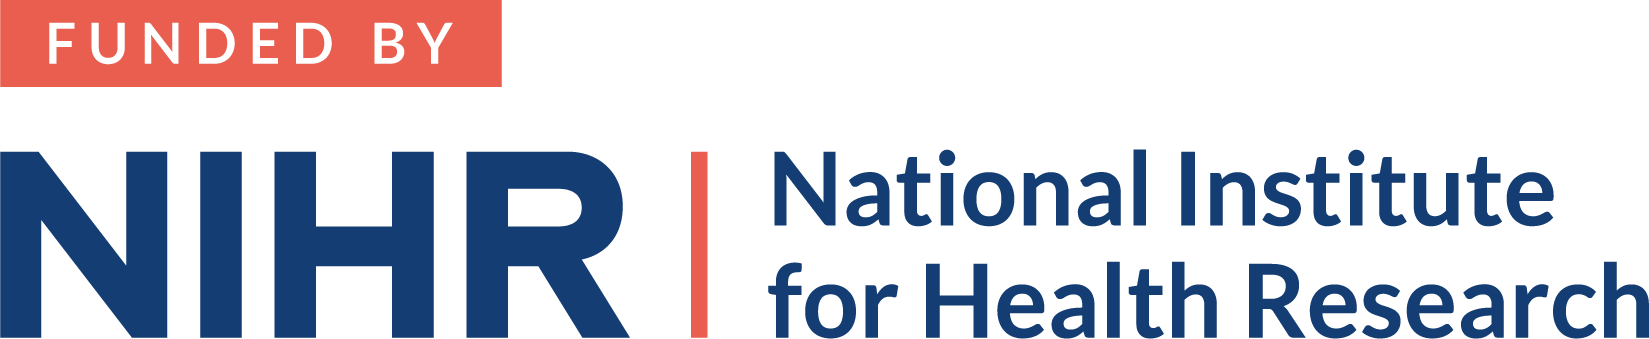 NIHR funded by logo